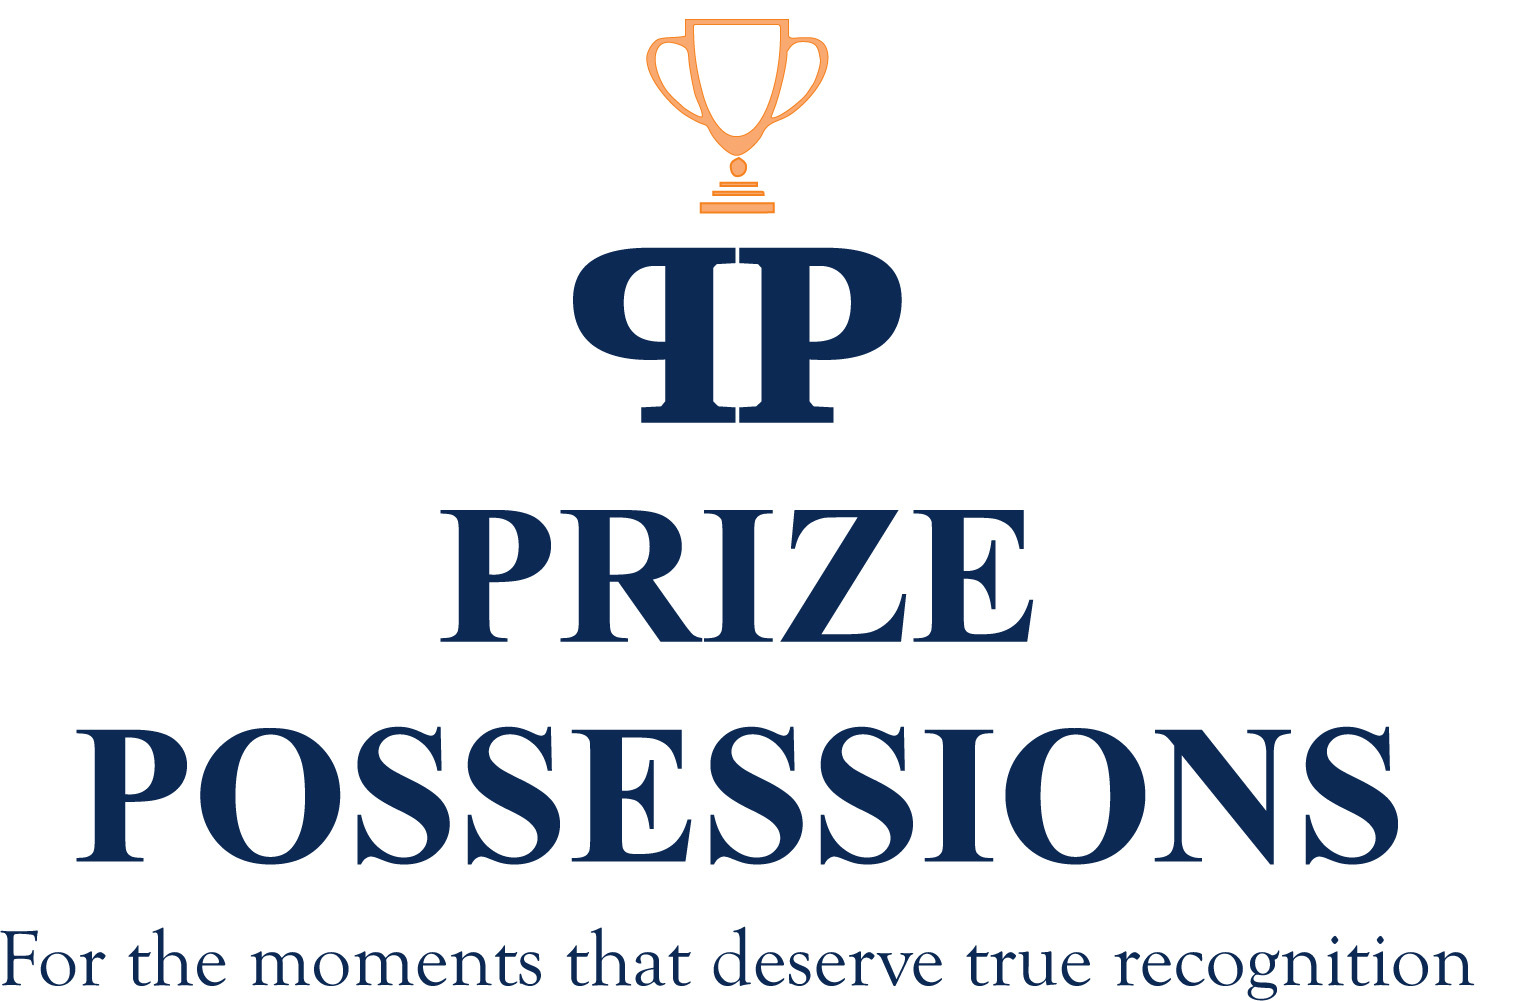 Prize Possessions